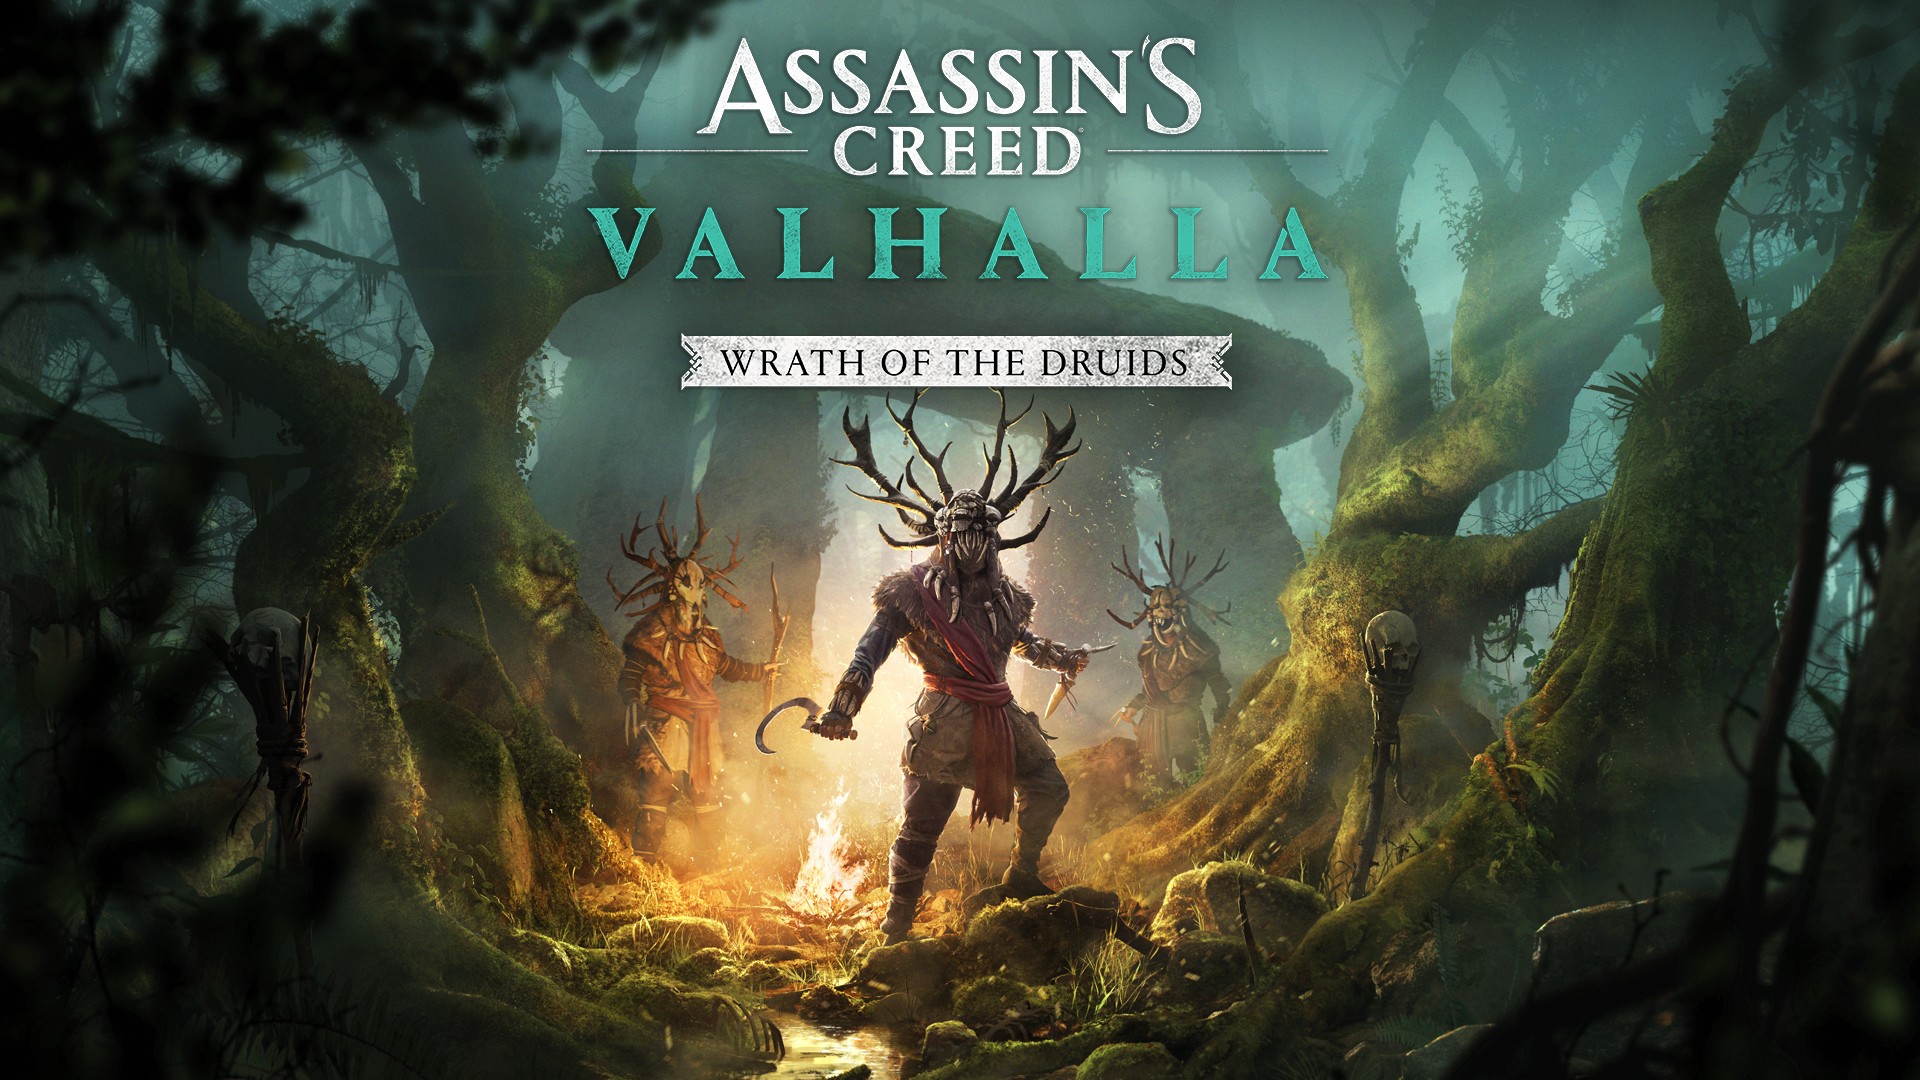 Wrath of the Druids, Assassin’s Creed Valhalla’s First Expansion Launches